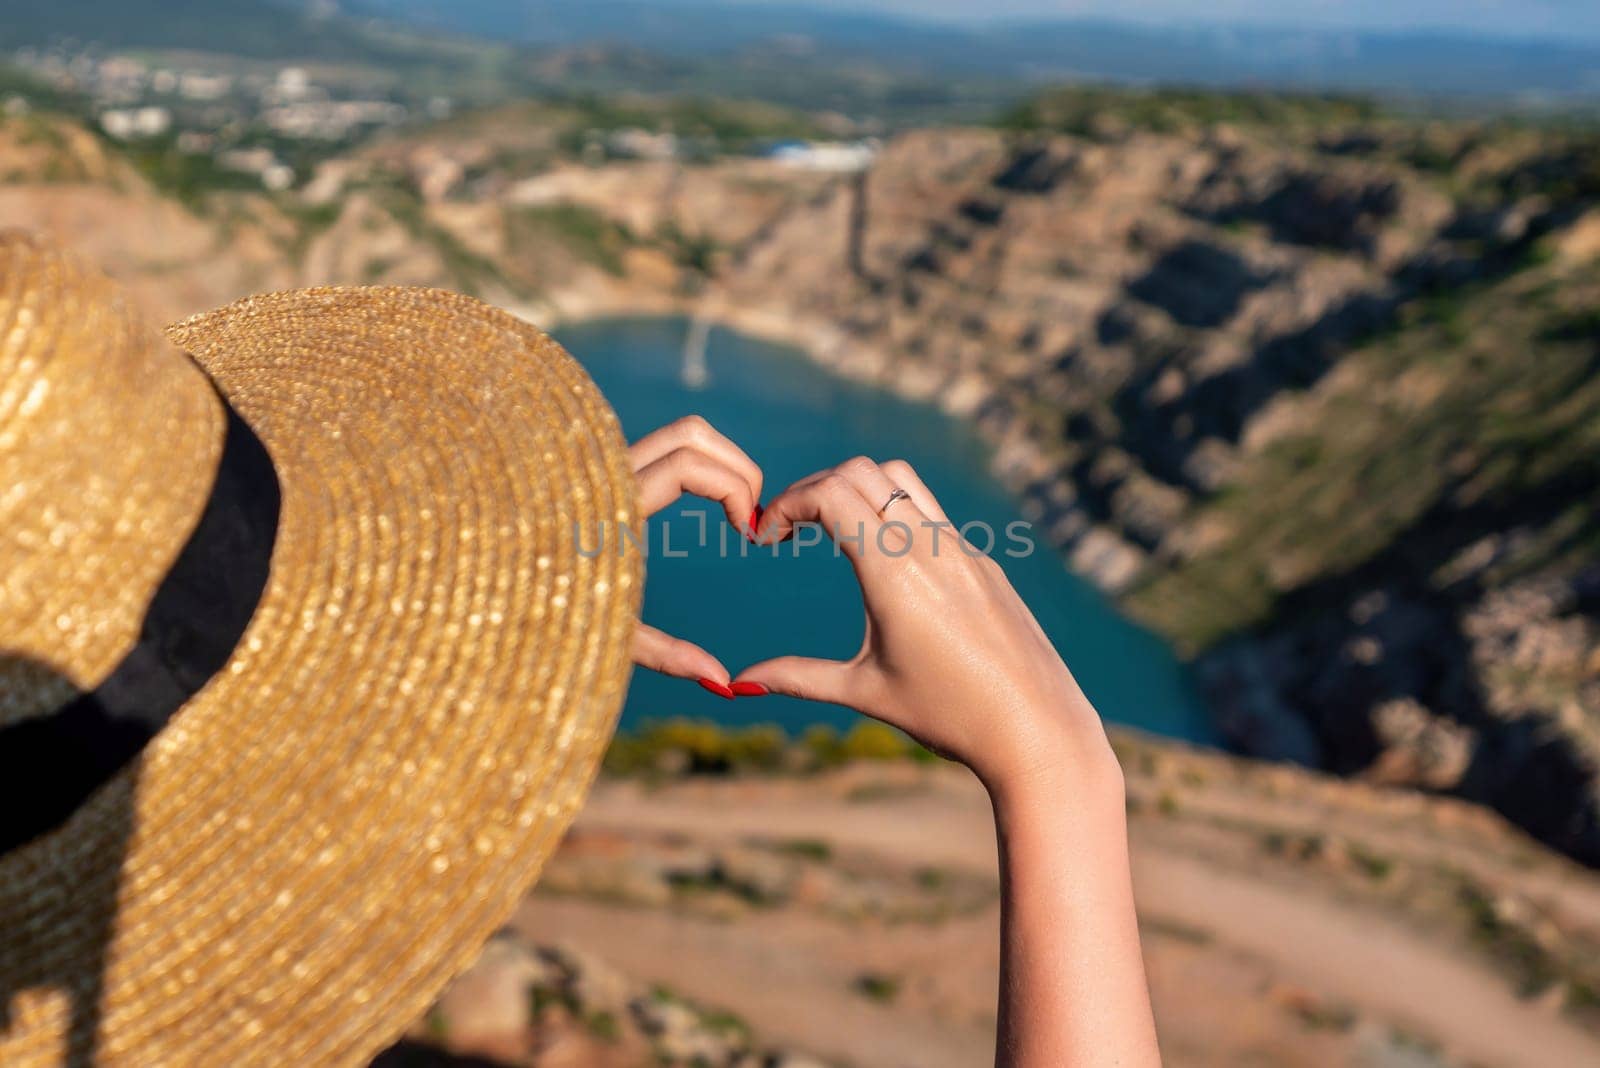 A woman wearing a straw hat is holding her hand up to make a heart shape. The scene is set in a beautiful natural setting, with a large body of water in the background